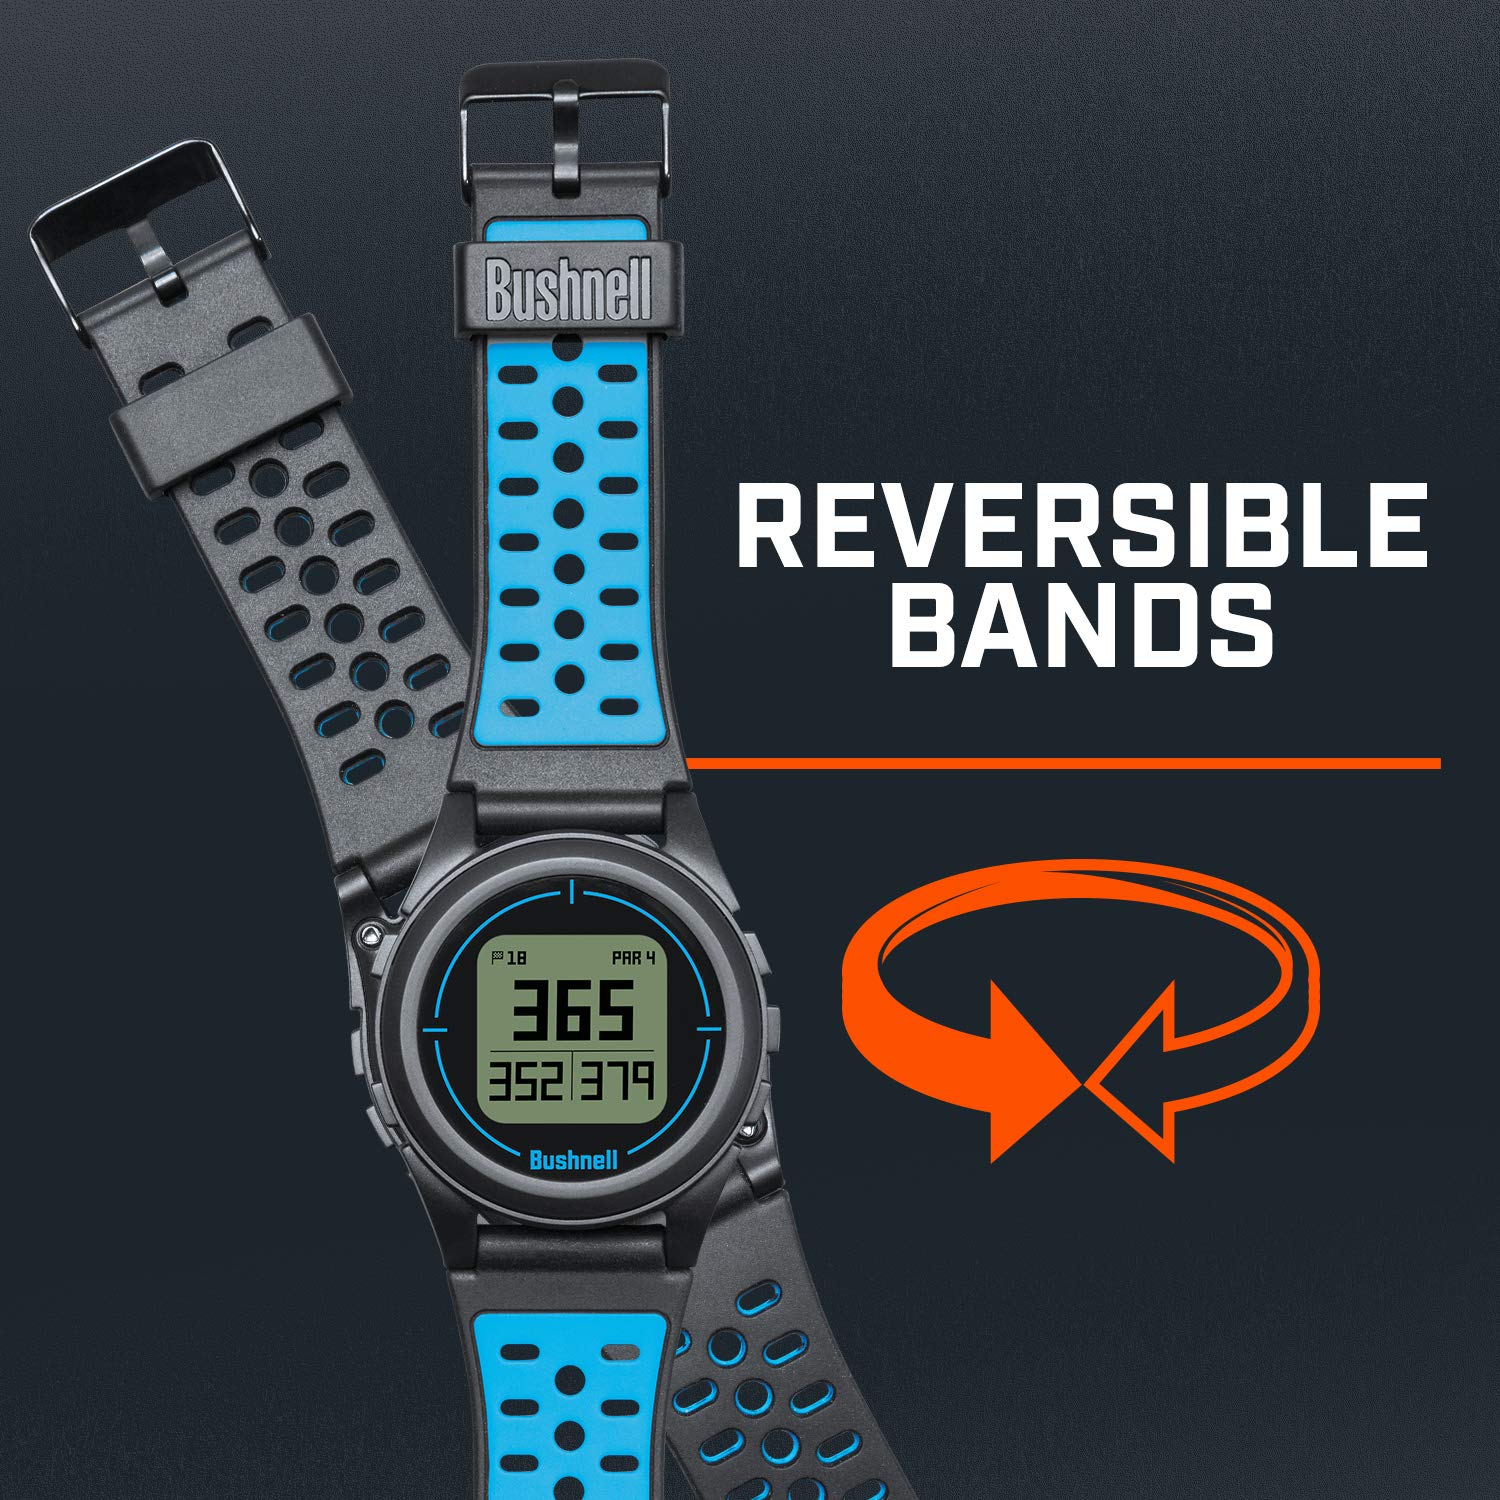 Bushnell Reversible Bands on Golf GPS Watch